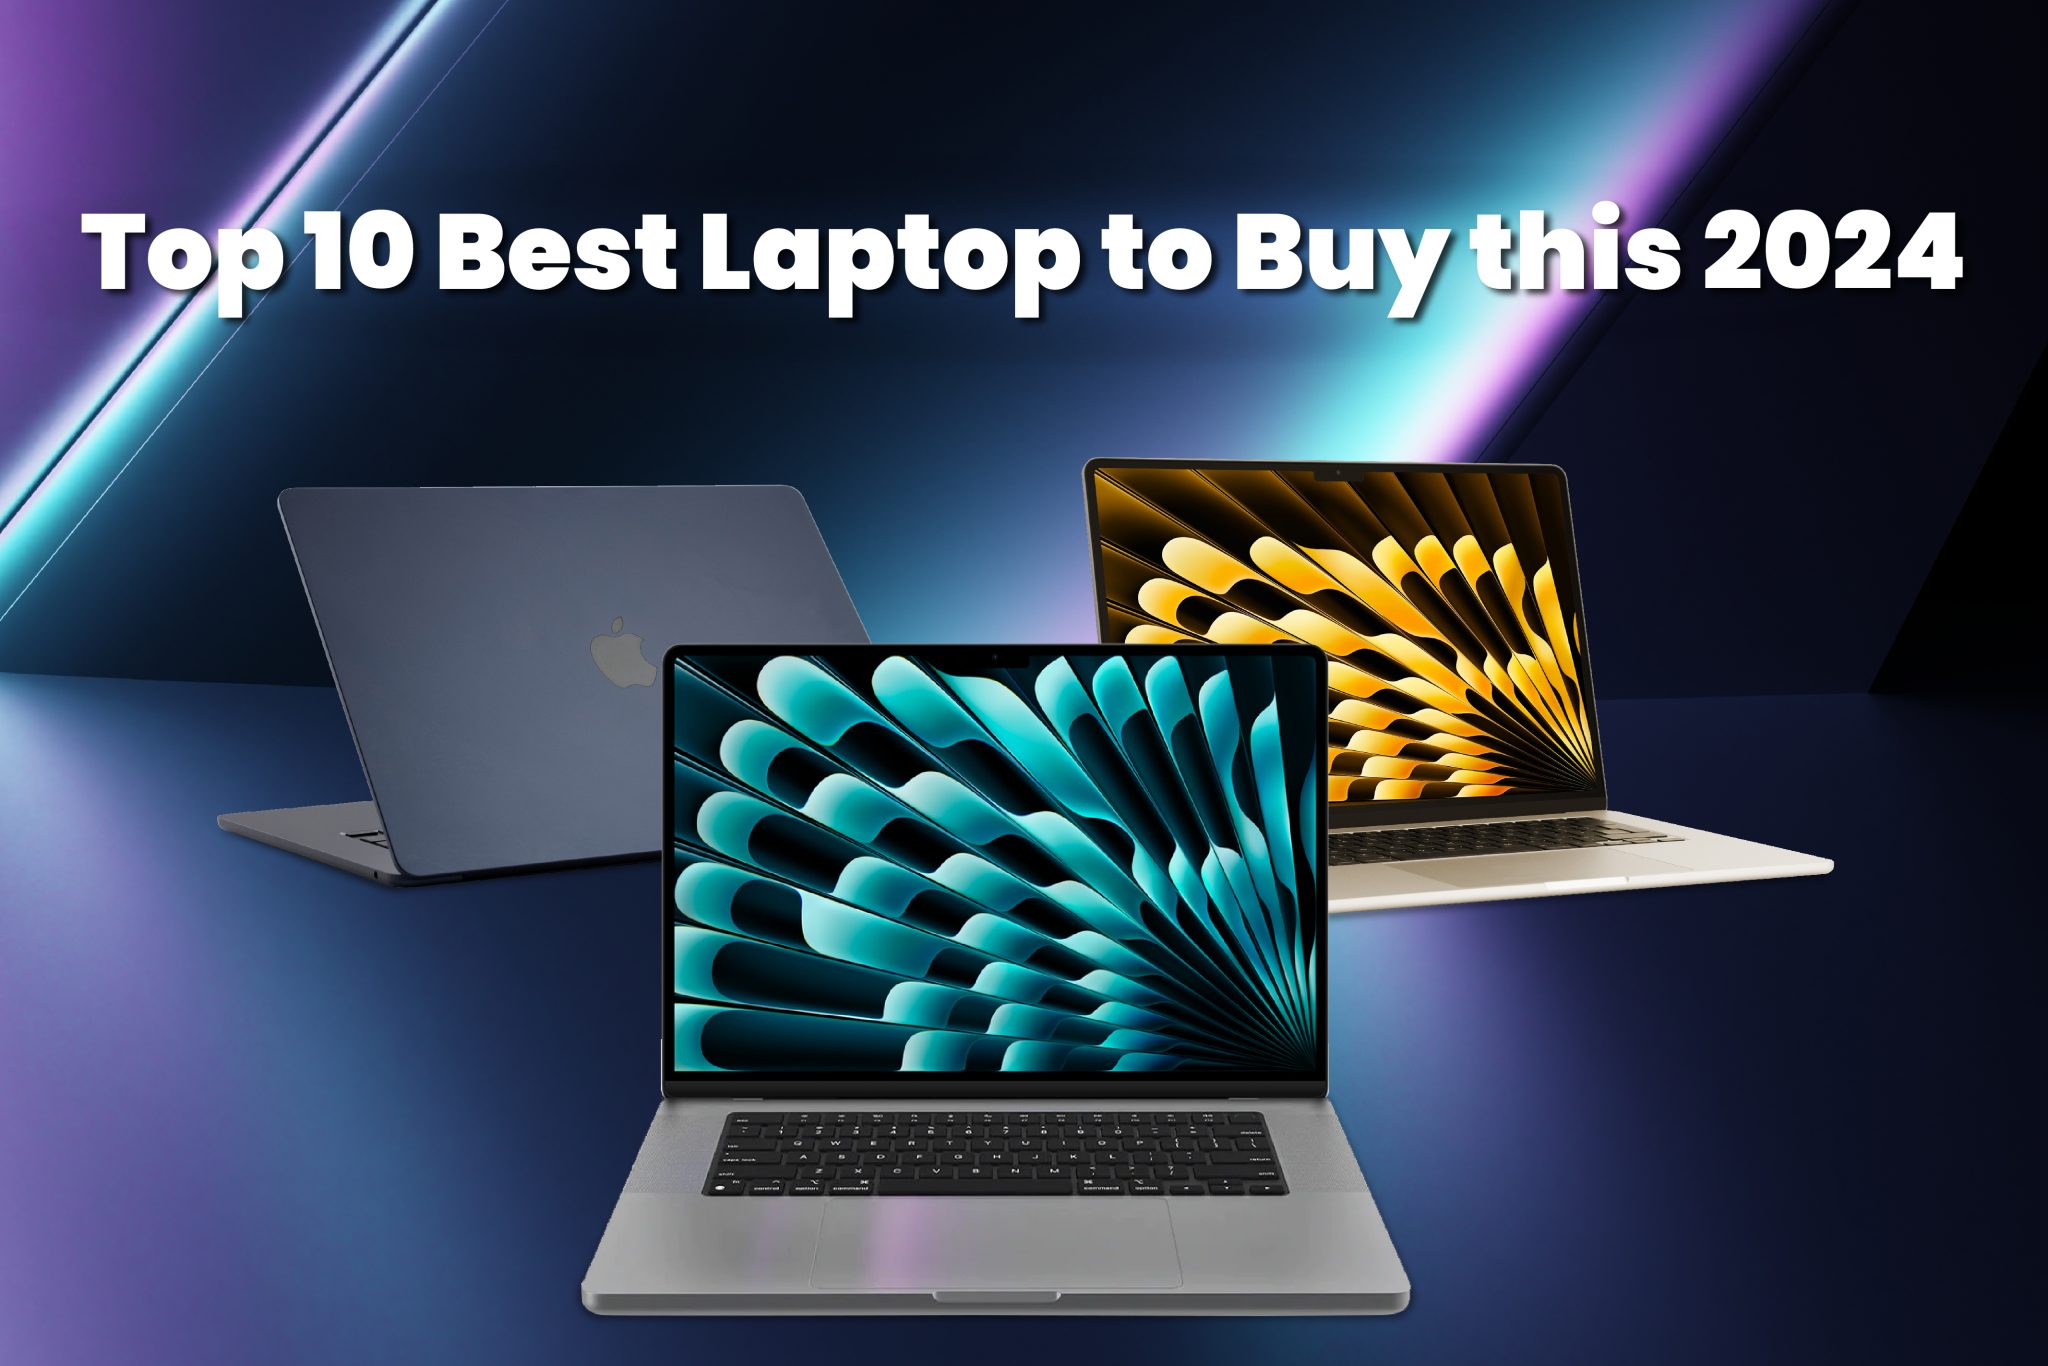 Top 10 Best Laptop to Buy this 2024 in the Philippines